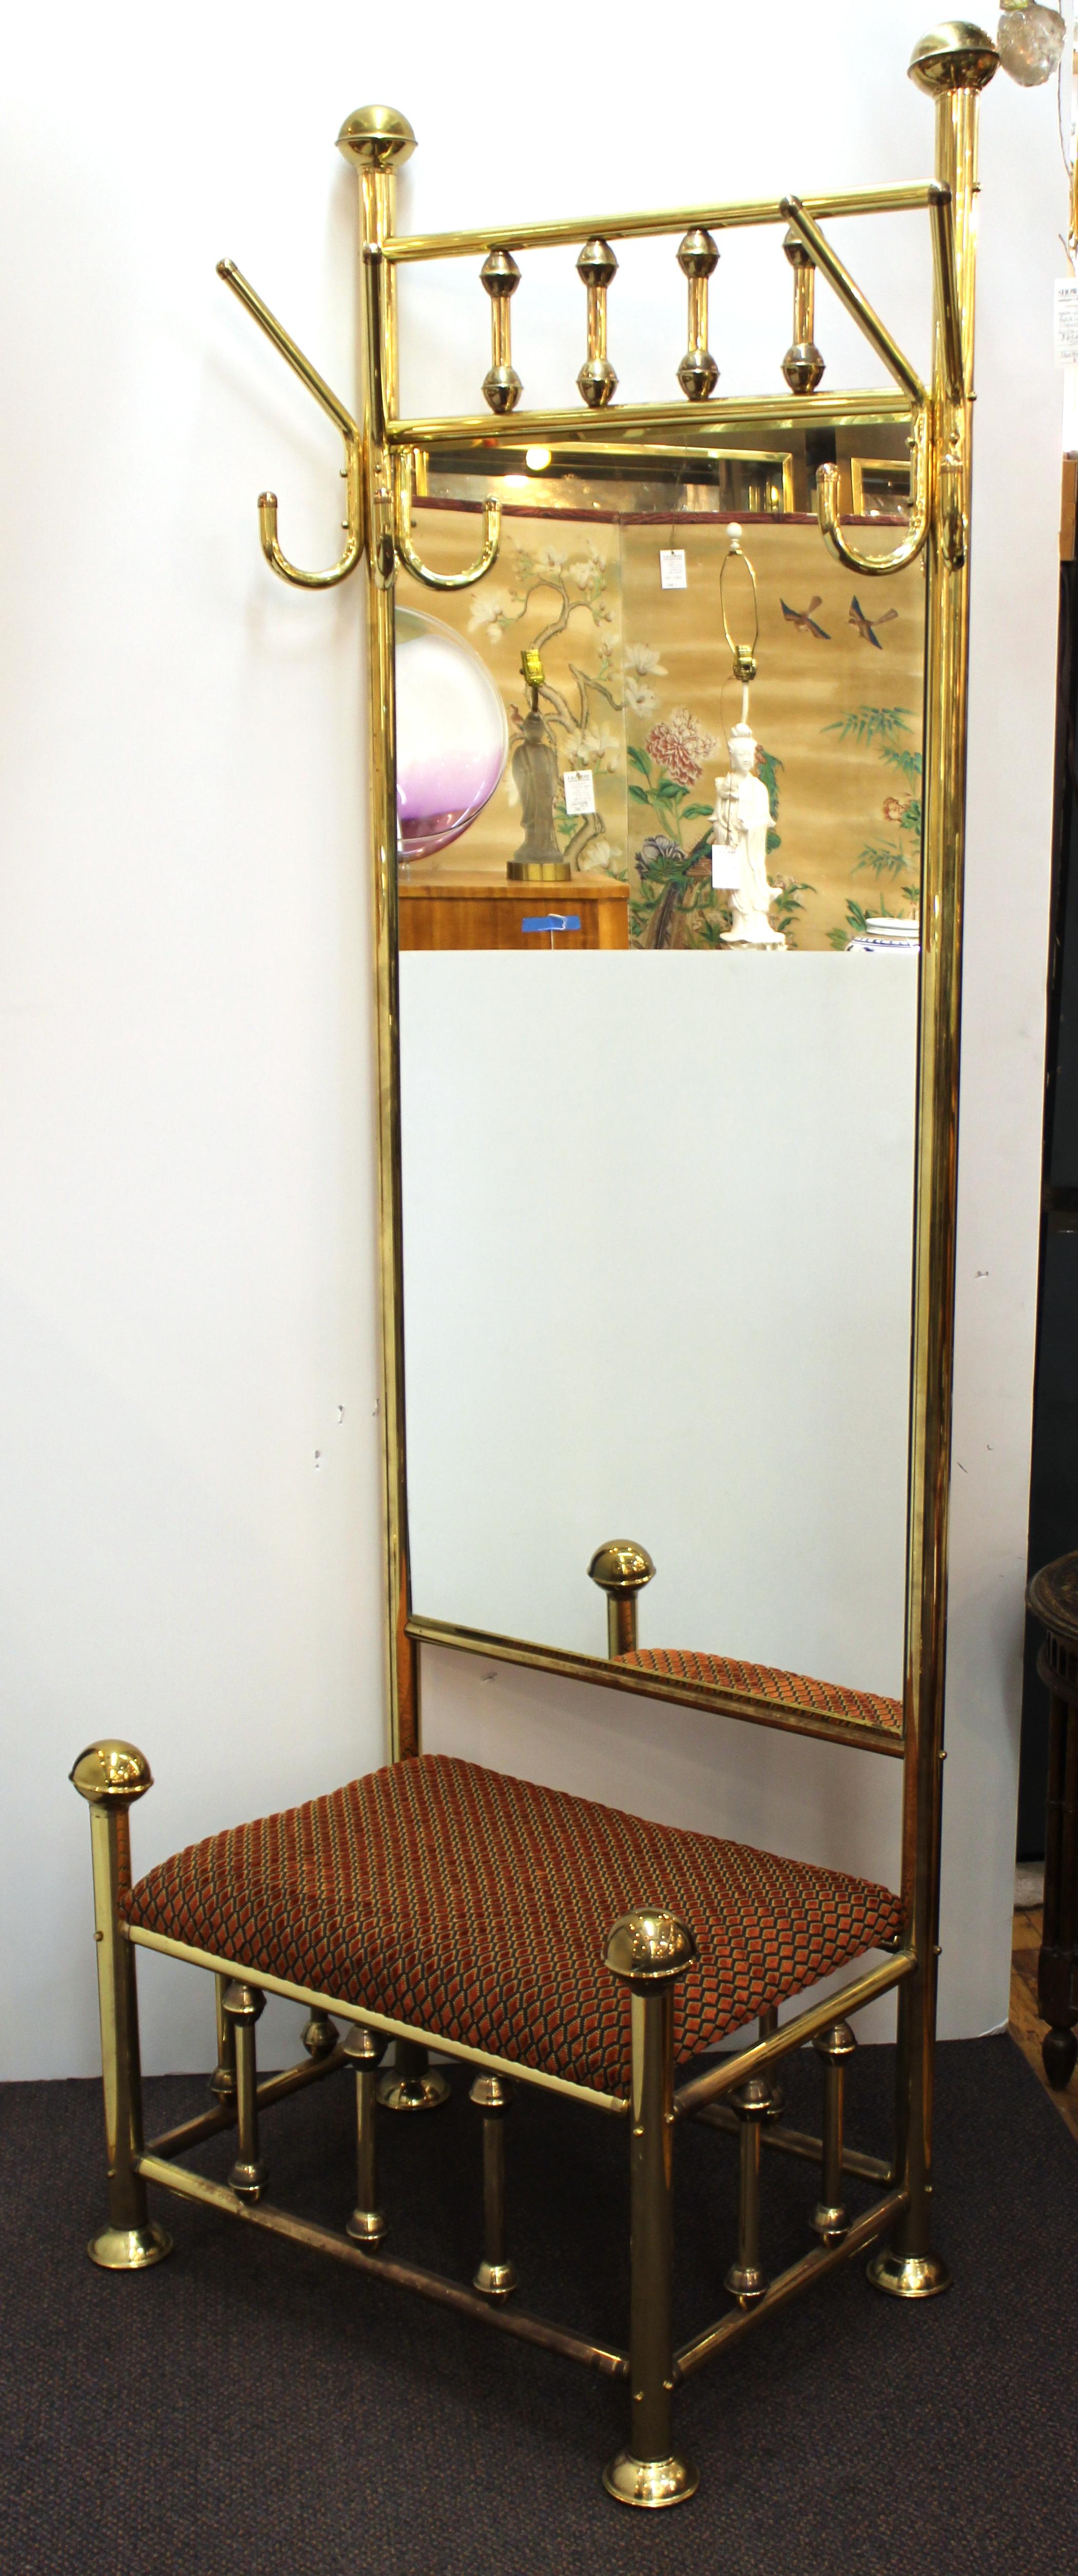 Mid-Century Modern brass hall tree with tall mirror and upholstered bench. The piece has hooks on both sides of the upper part and has recently been reupholstered. In great vintage condition with minor age-appropriate wear to the metal surfaces.